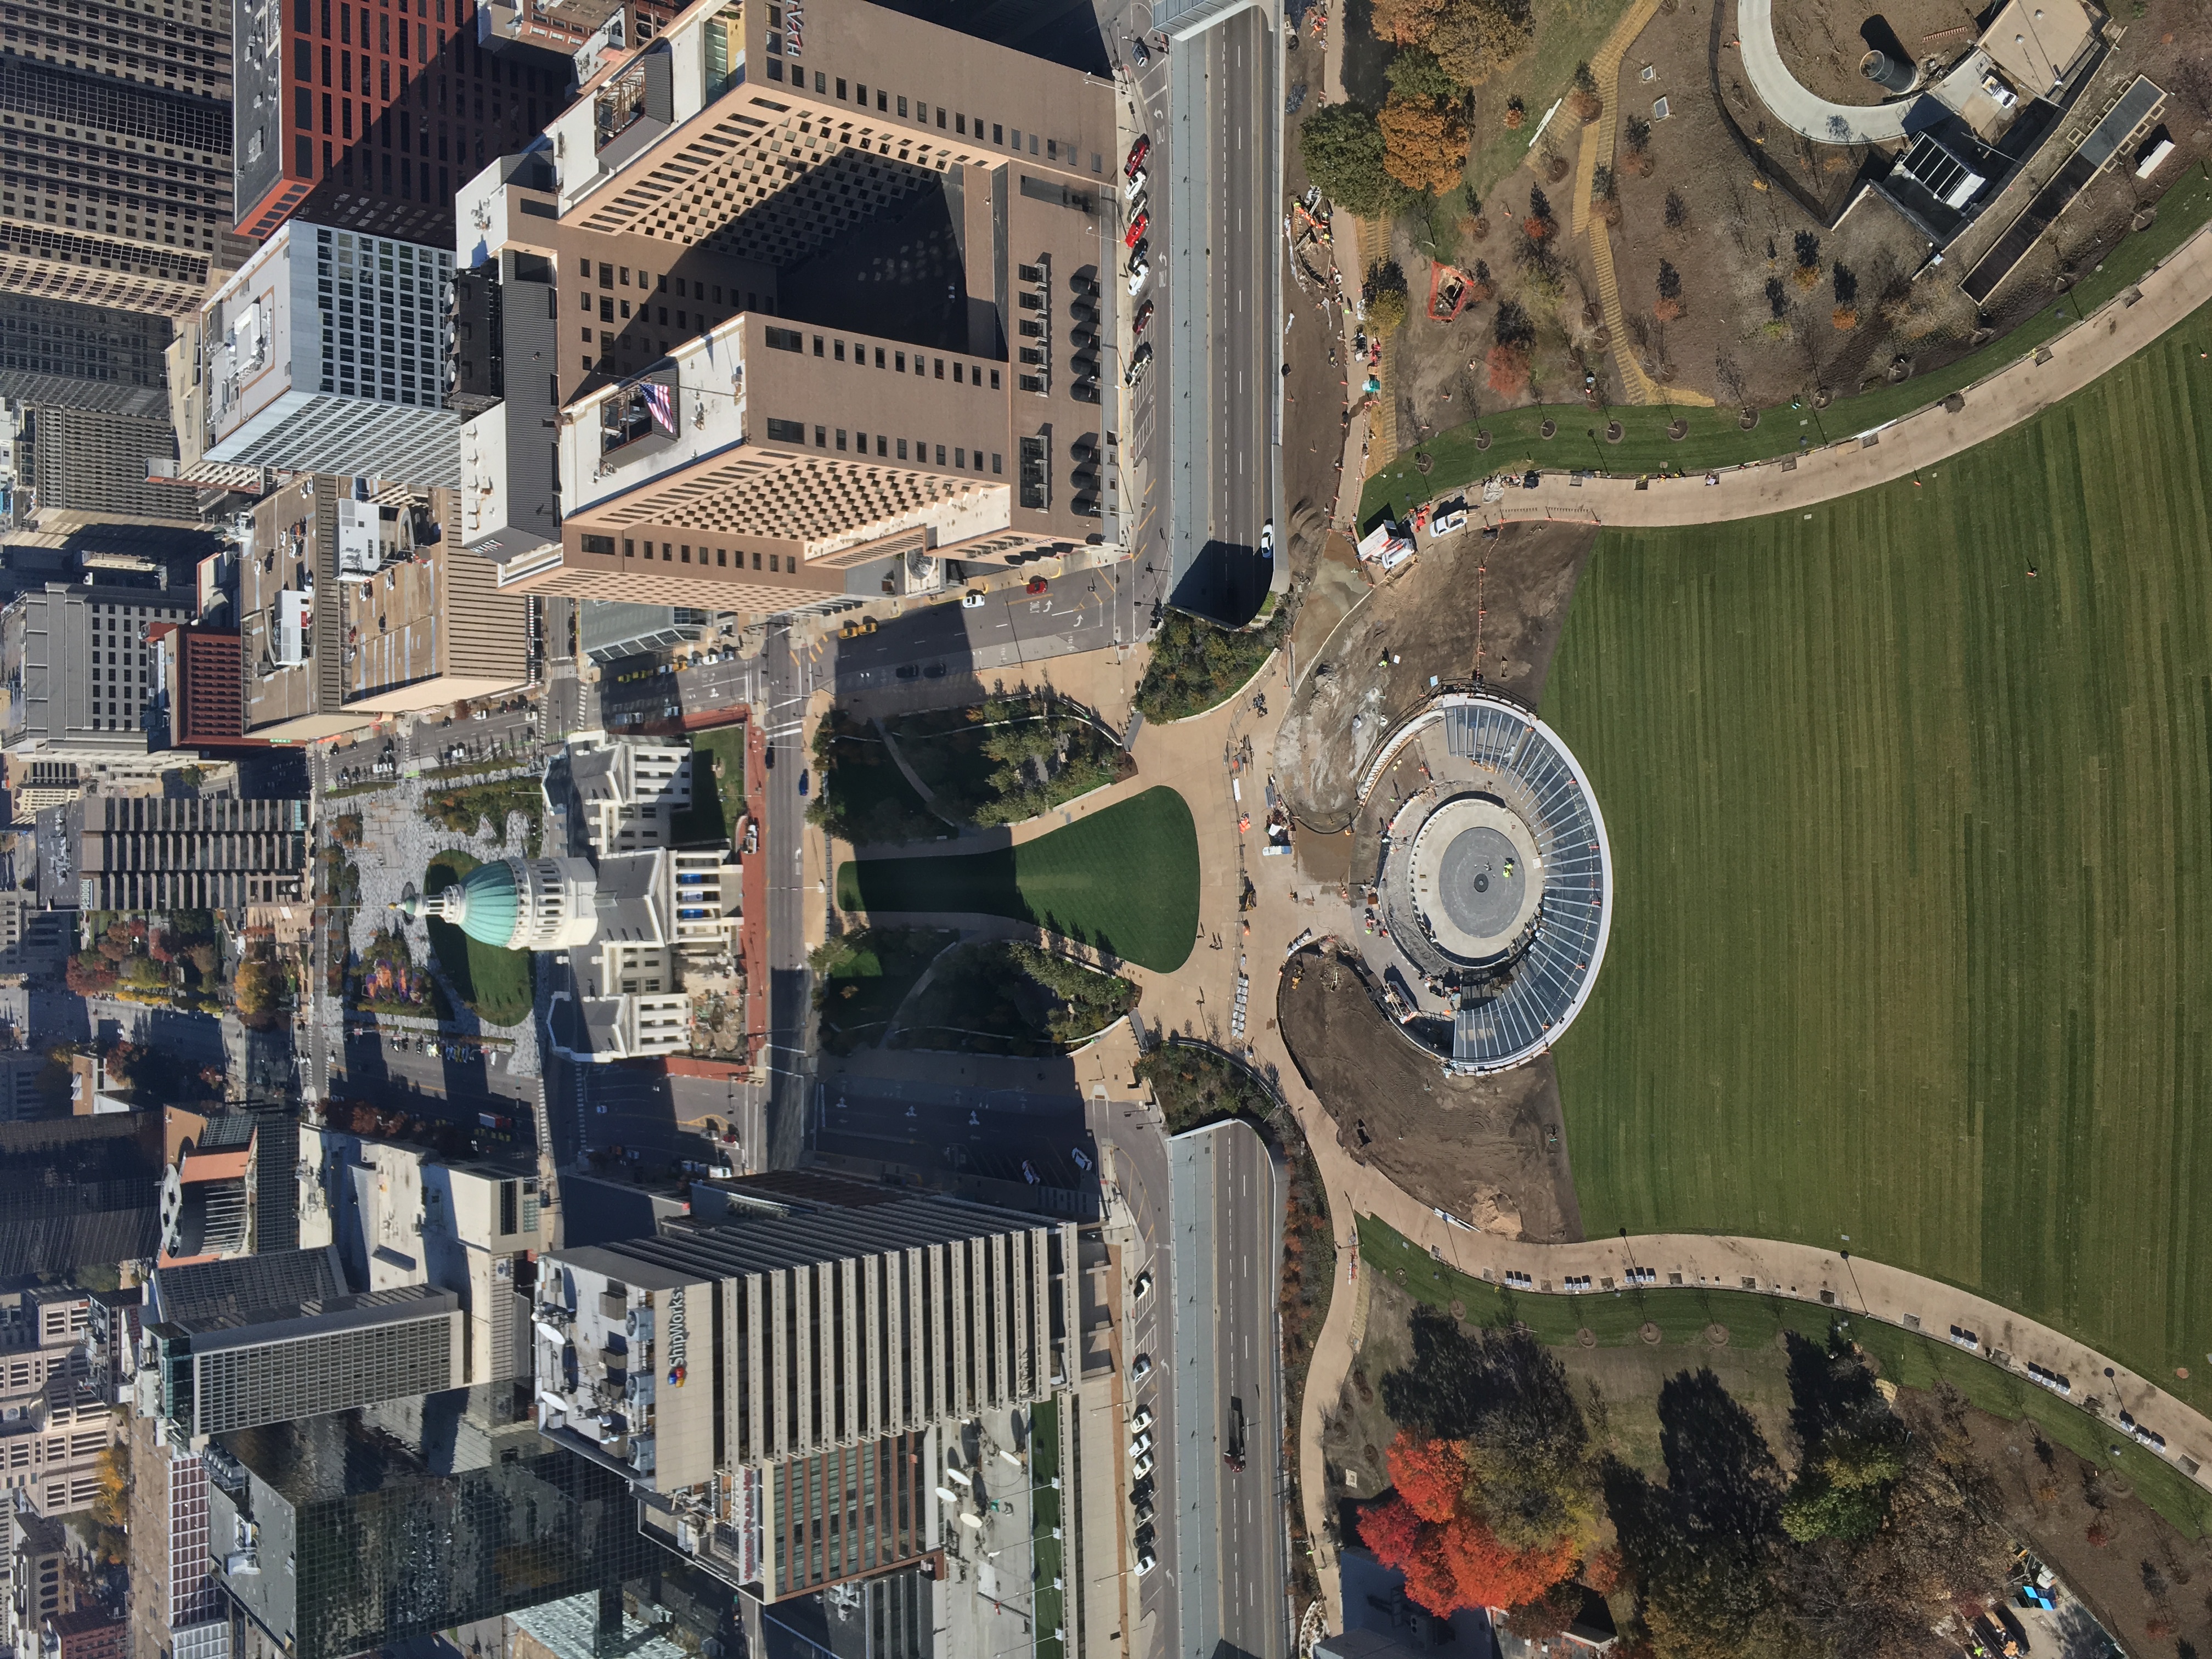 Downtown Gateway Arch - All You Need to Know BEFORE You Go (with Photos)